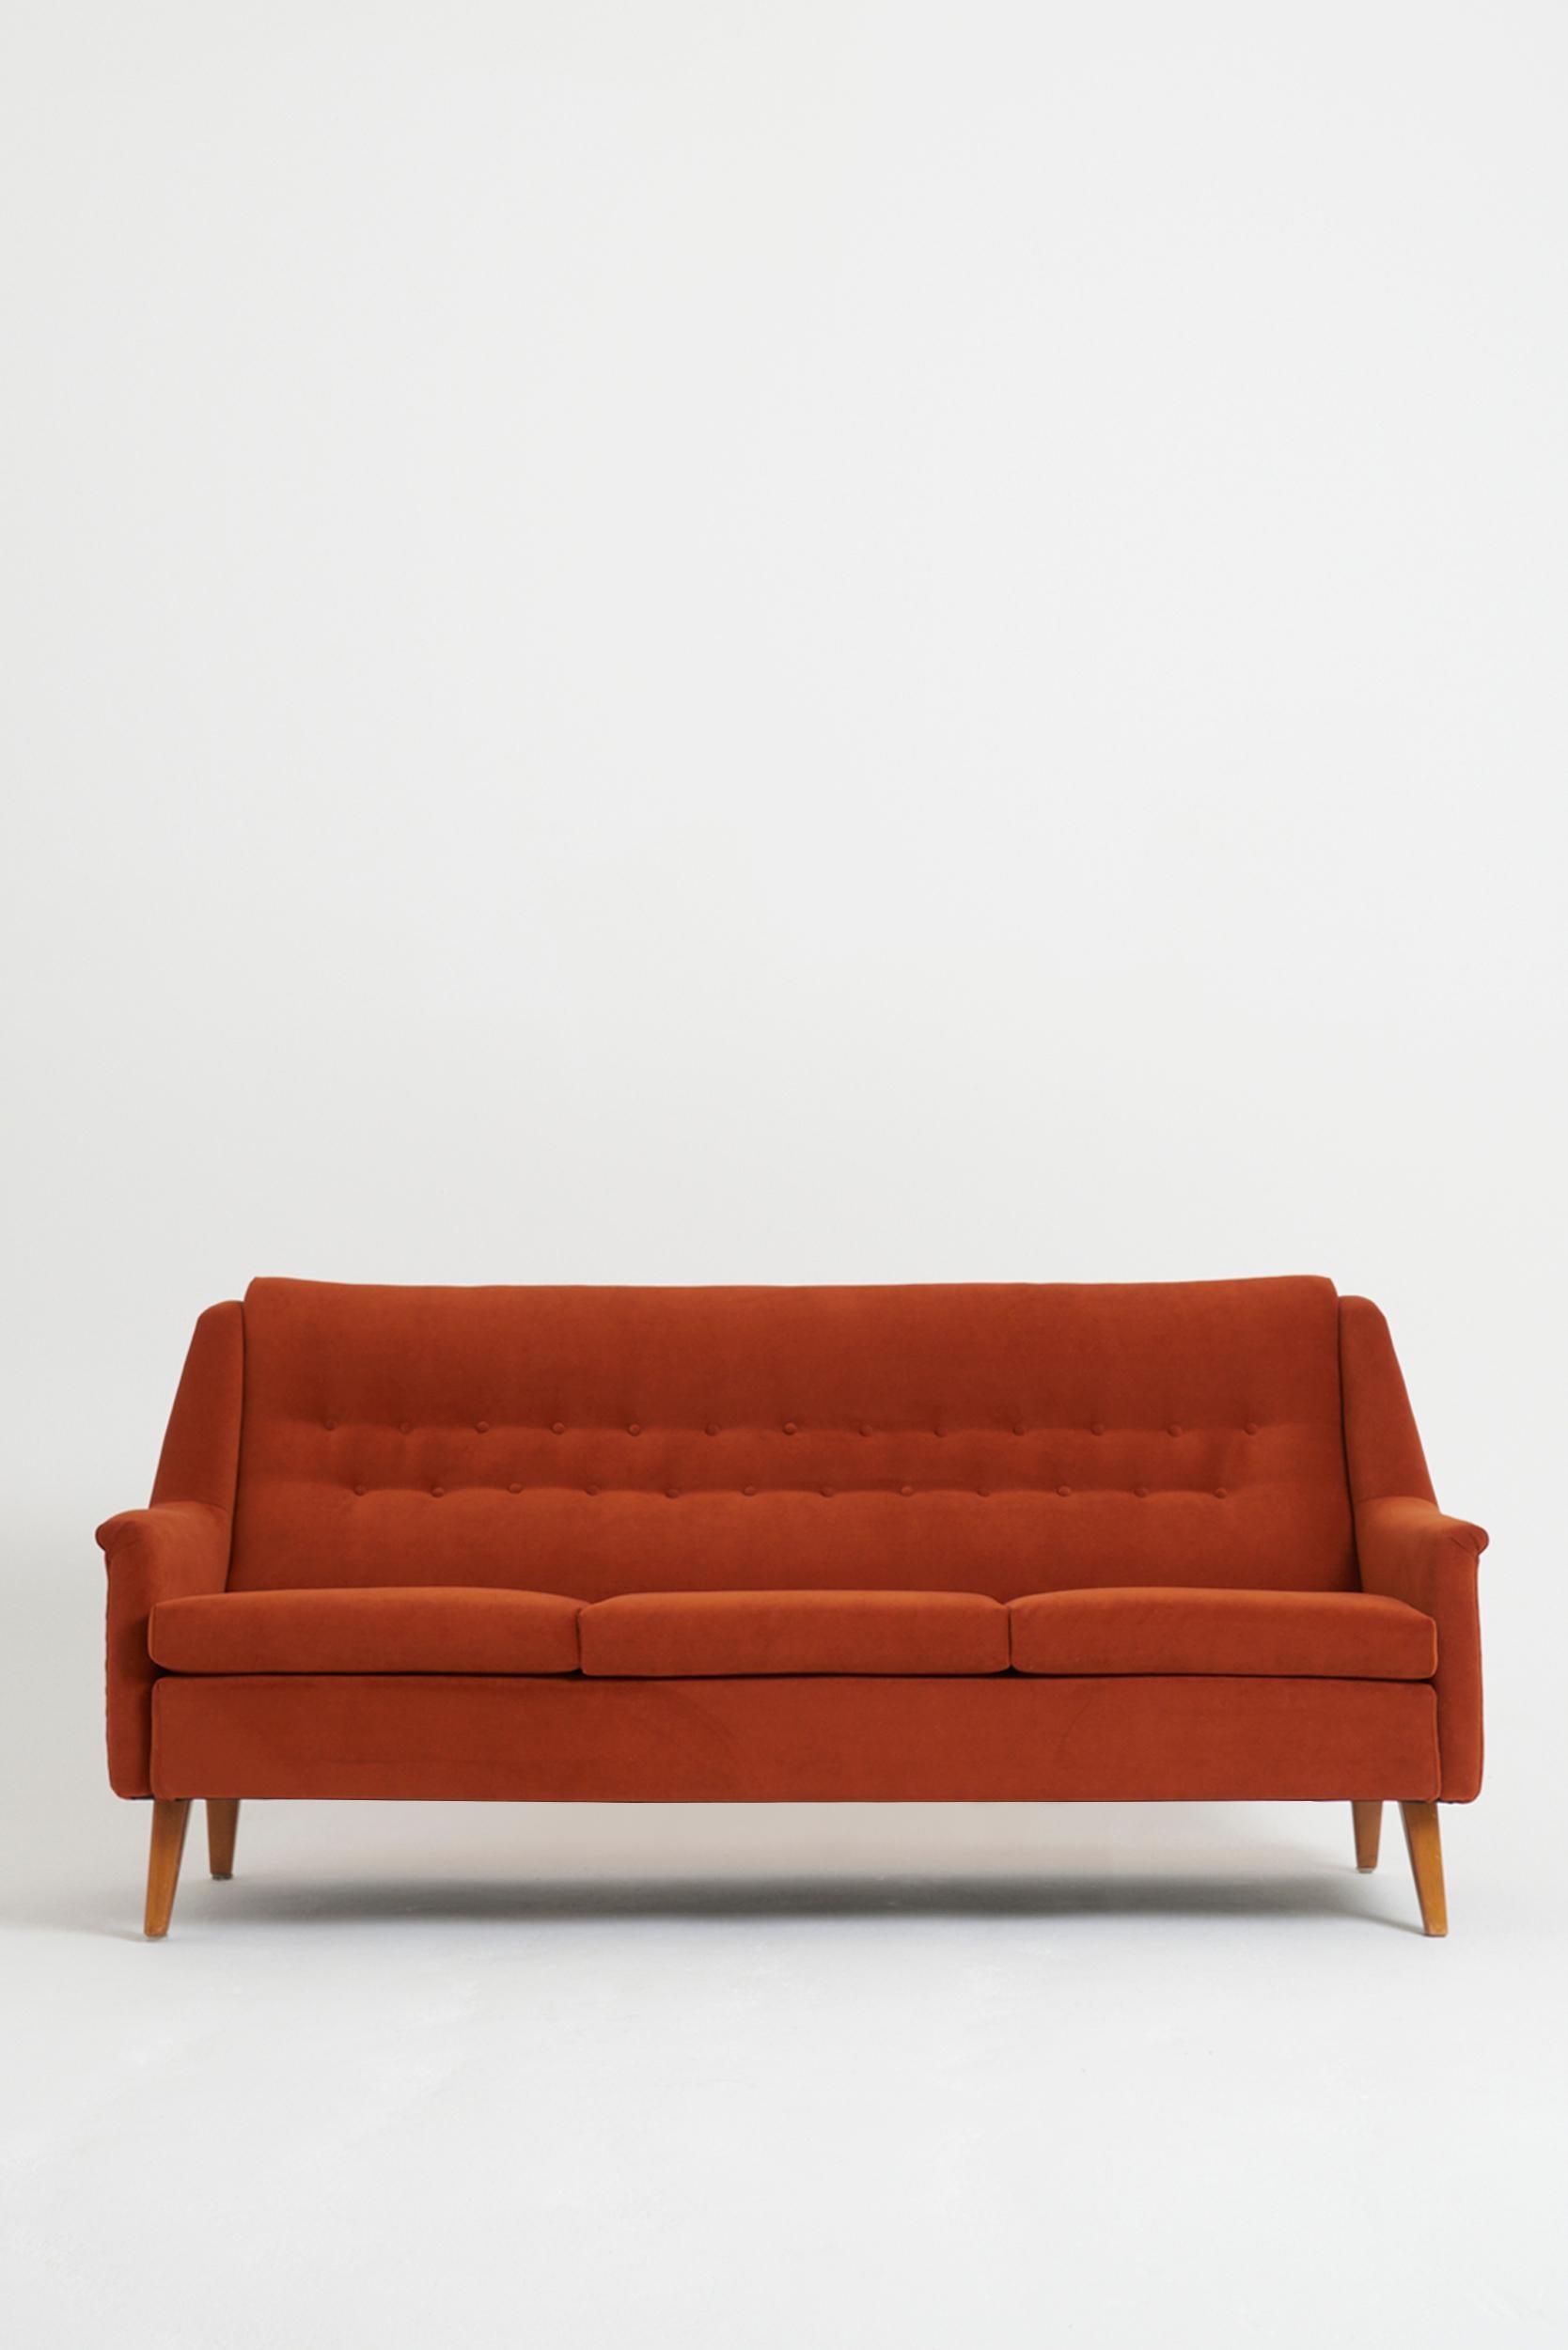 A buttoned sofa, upholstered in burnt orange velvet
Sweden, Circa 1940-50
86 cm high by 179 cm wide by 84 cm depth, seat height 43 cm